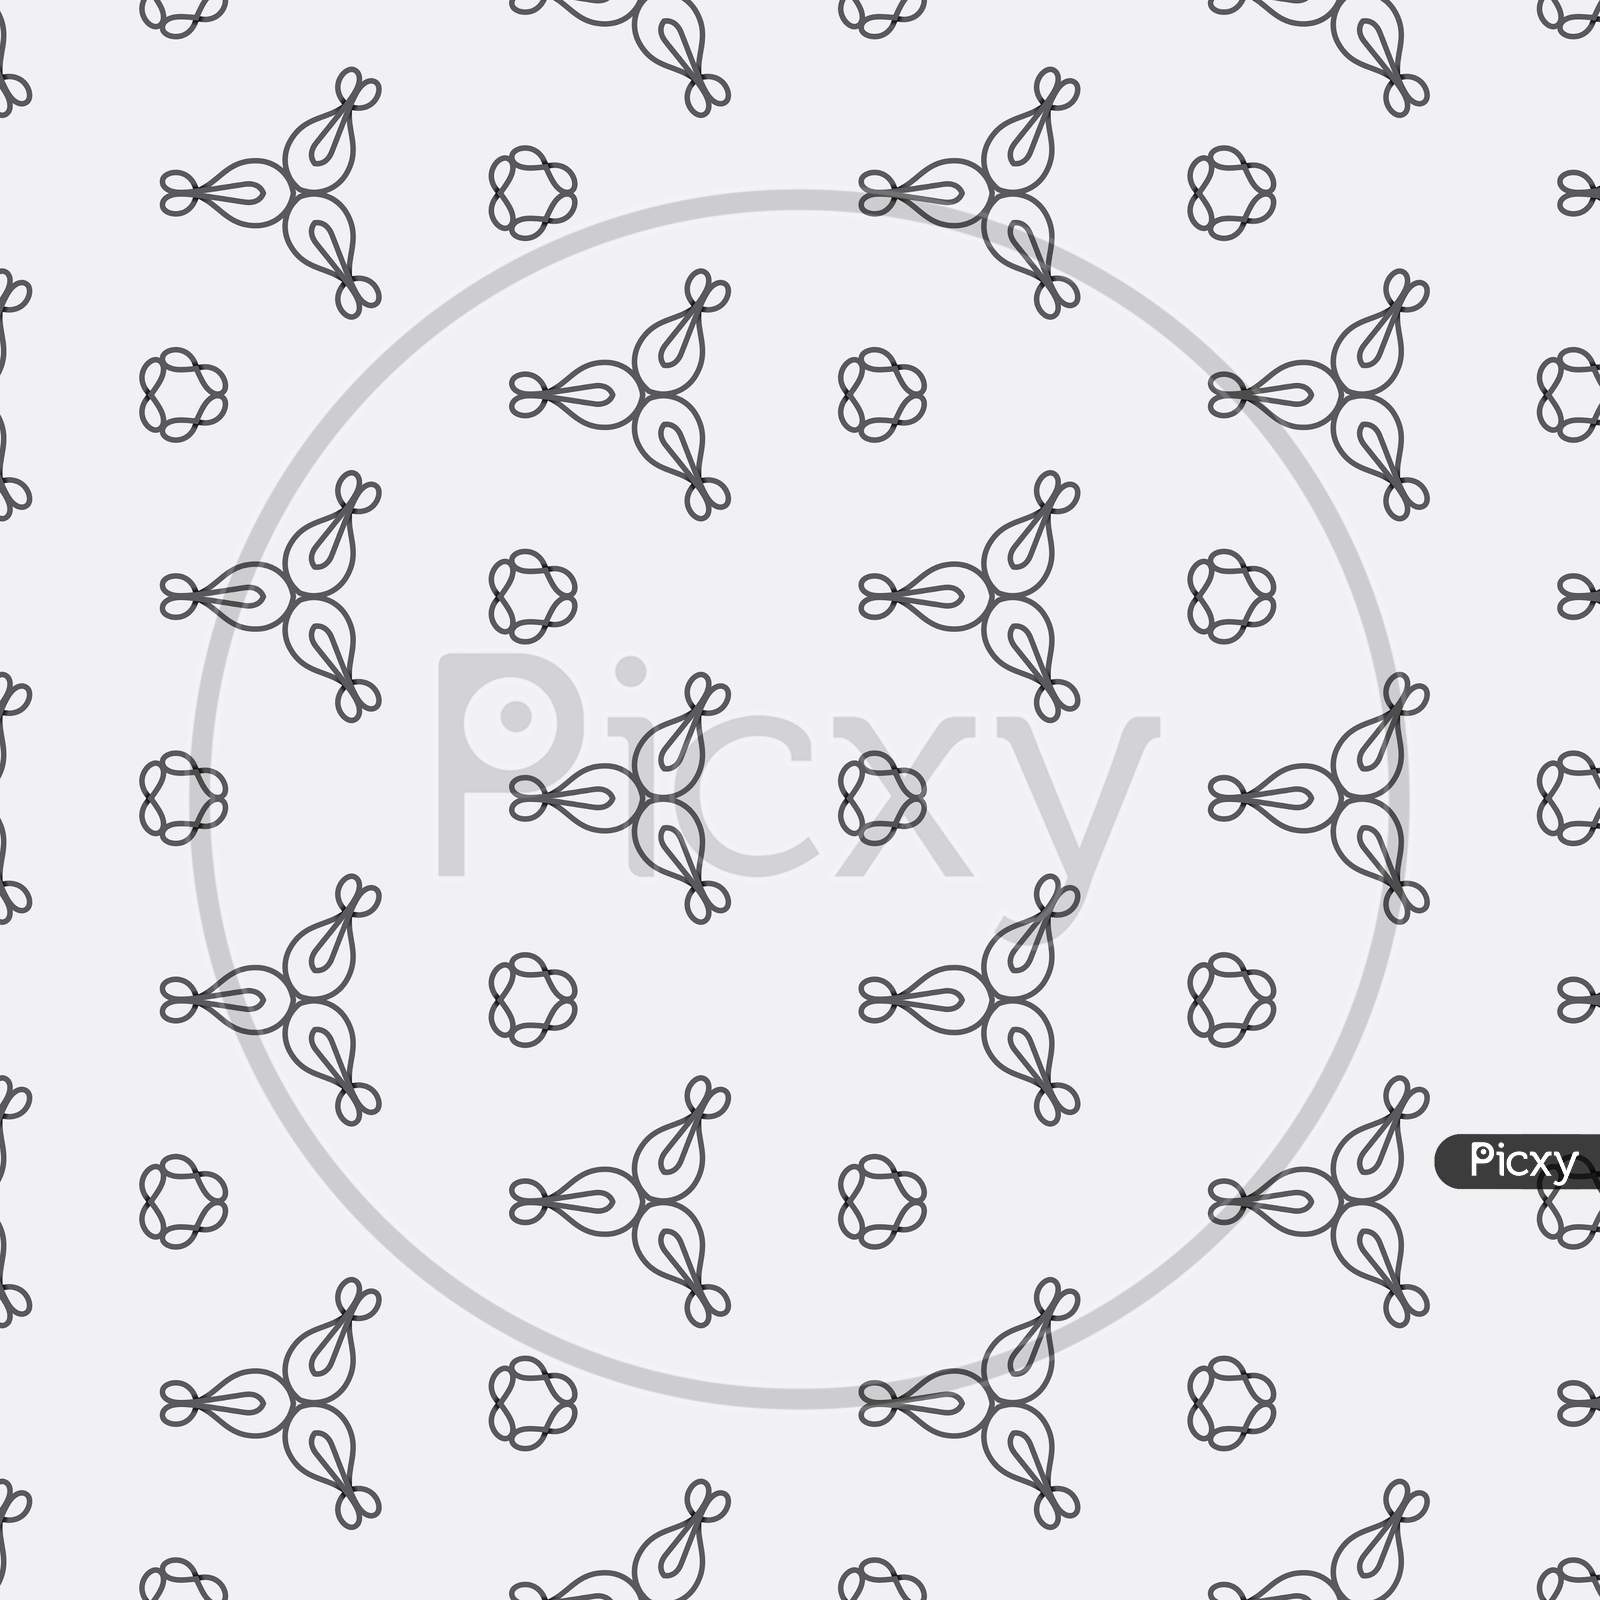 Beautiful Monochromatic Symmetrical Designs On Solid Sheet Of Wallpaper. Concept Of Home Decor And Interior Designing